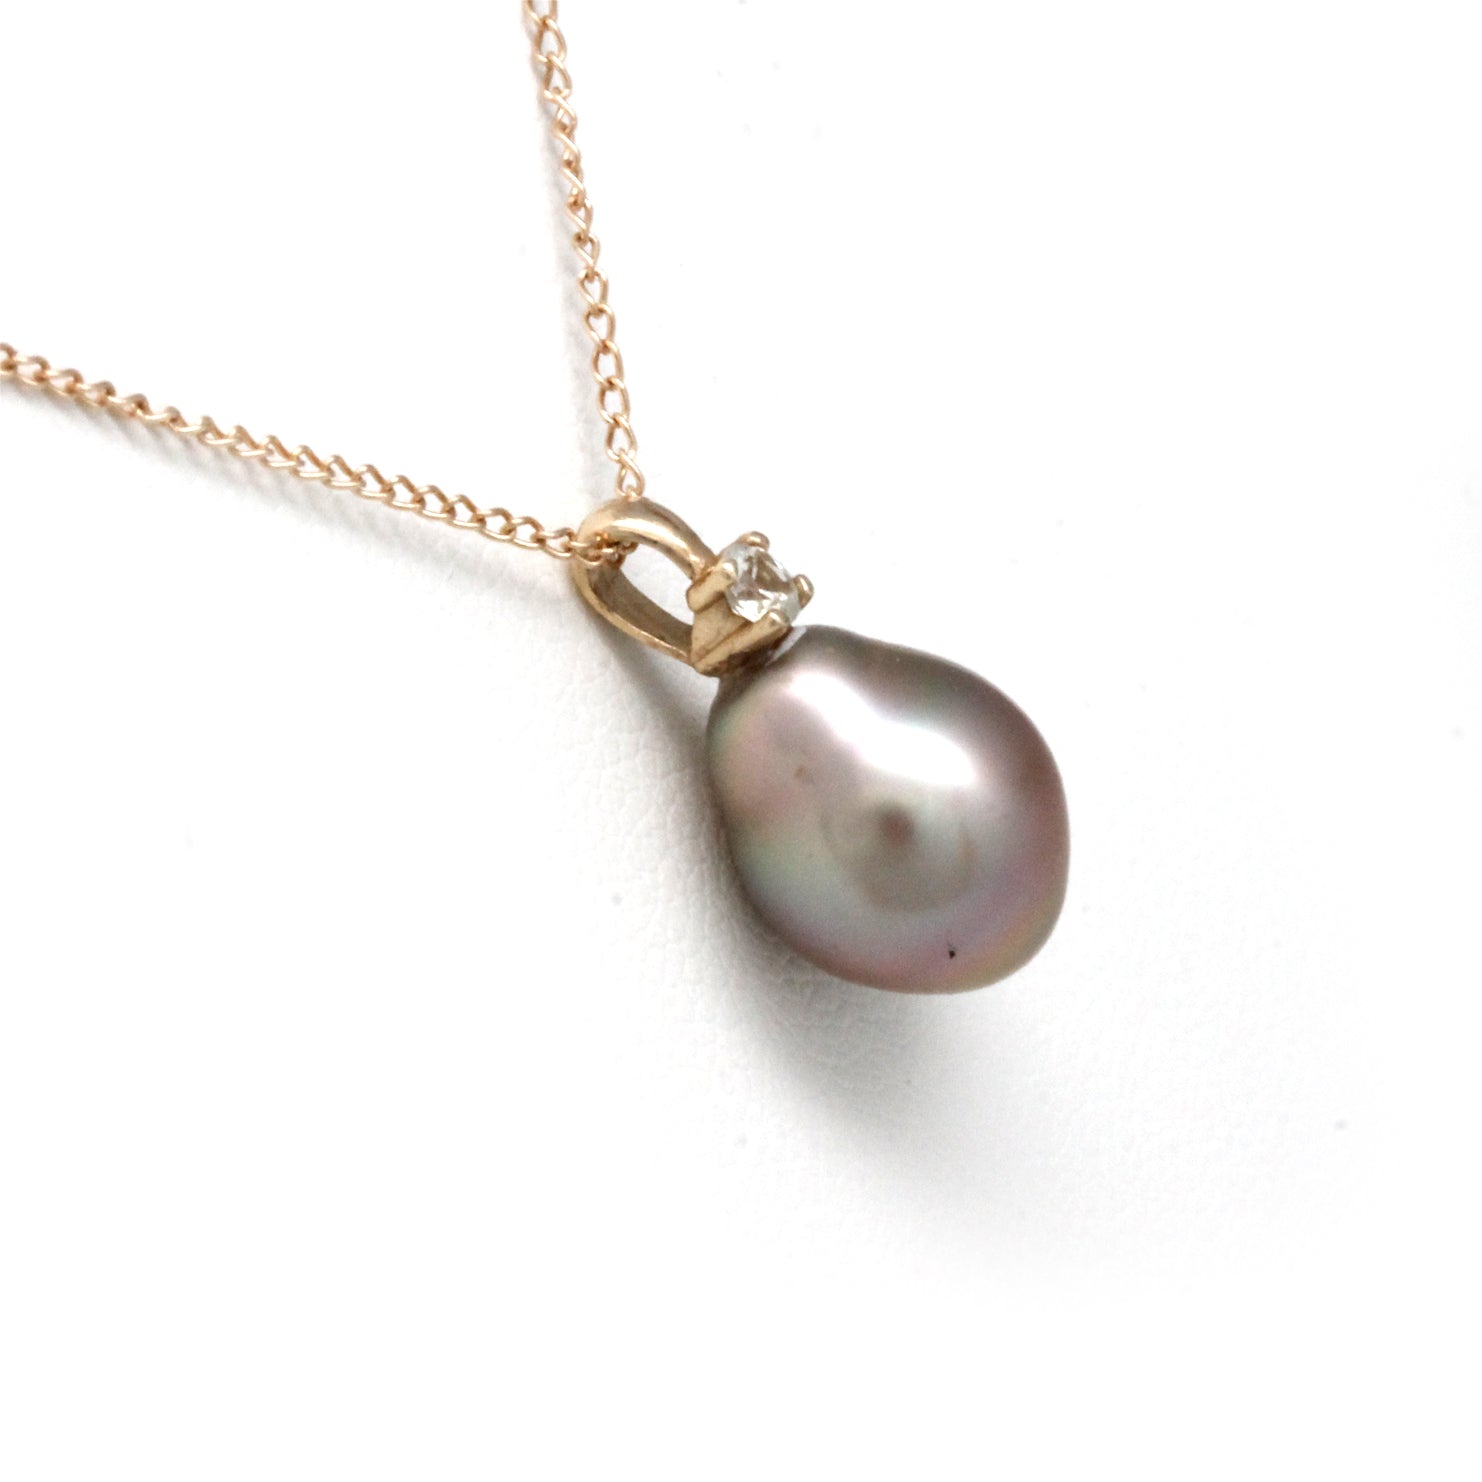 Lustrous light iridescent Cortez Pearl on 14K Yellow Gold Pendant and Chain with Sapphire